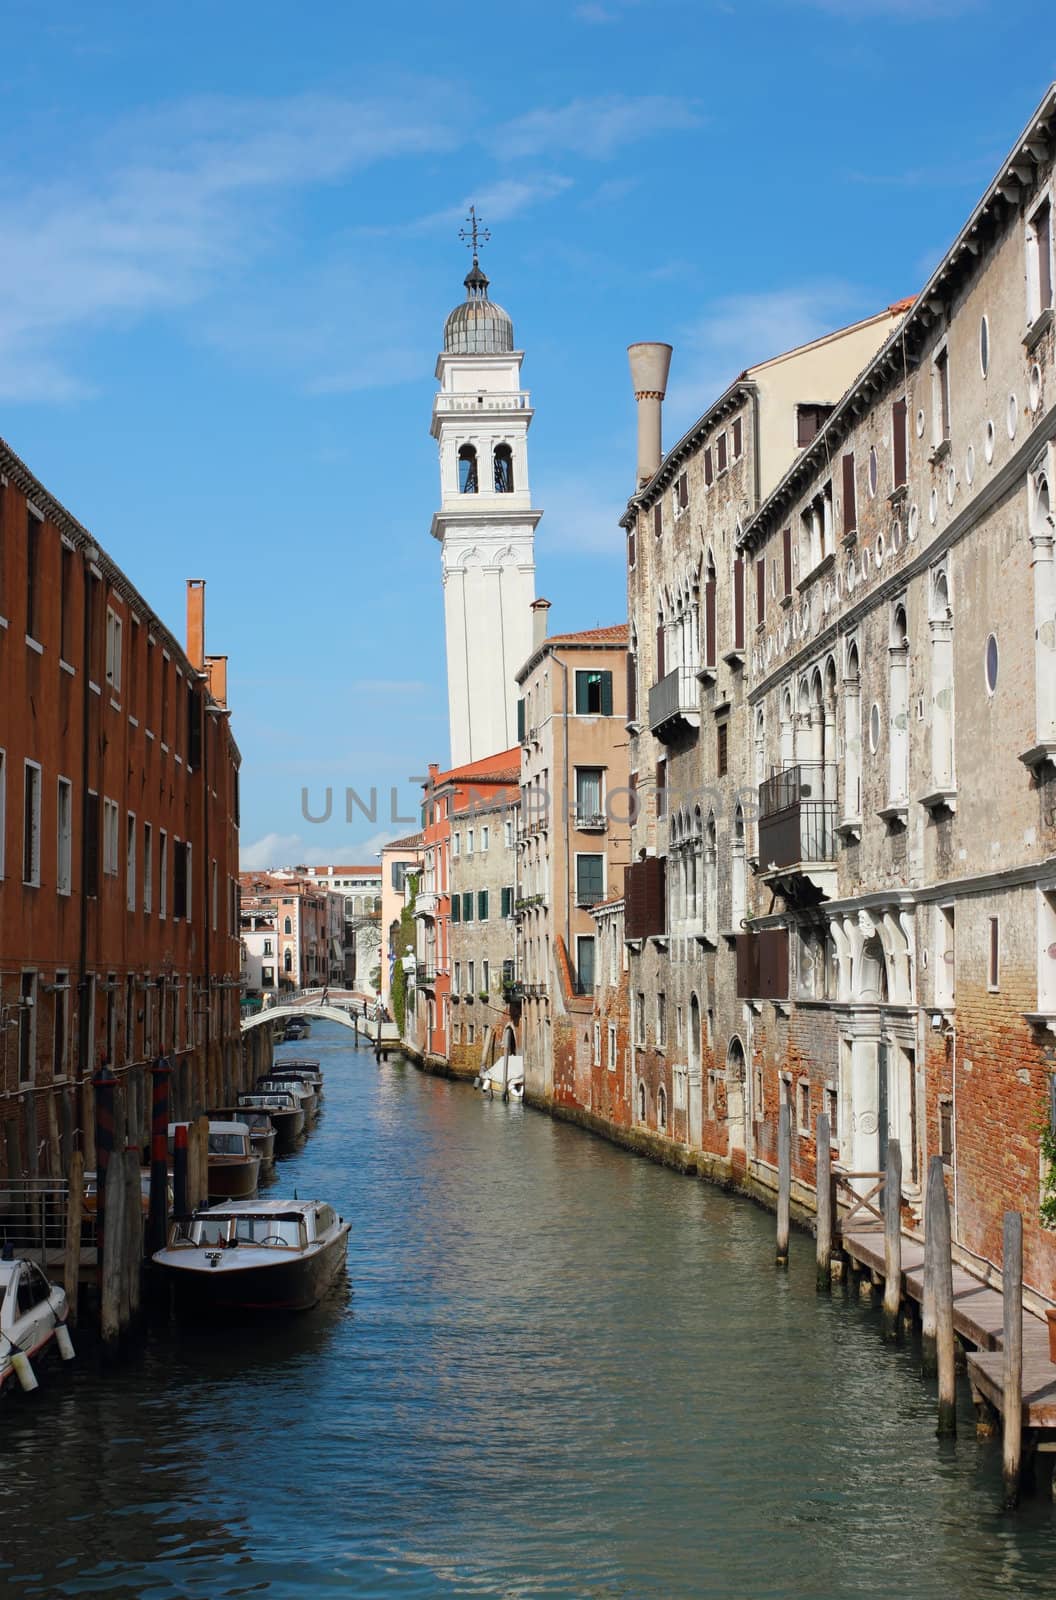 The Greek Church San Giorgio dei Greci  in Venice with Belltower leaning over the canal.